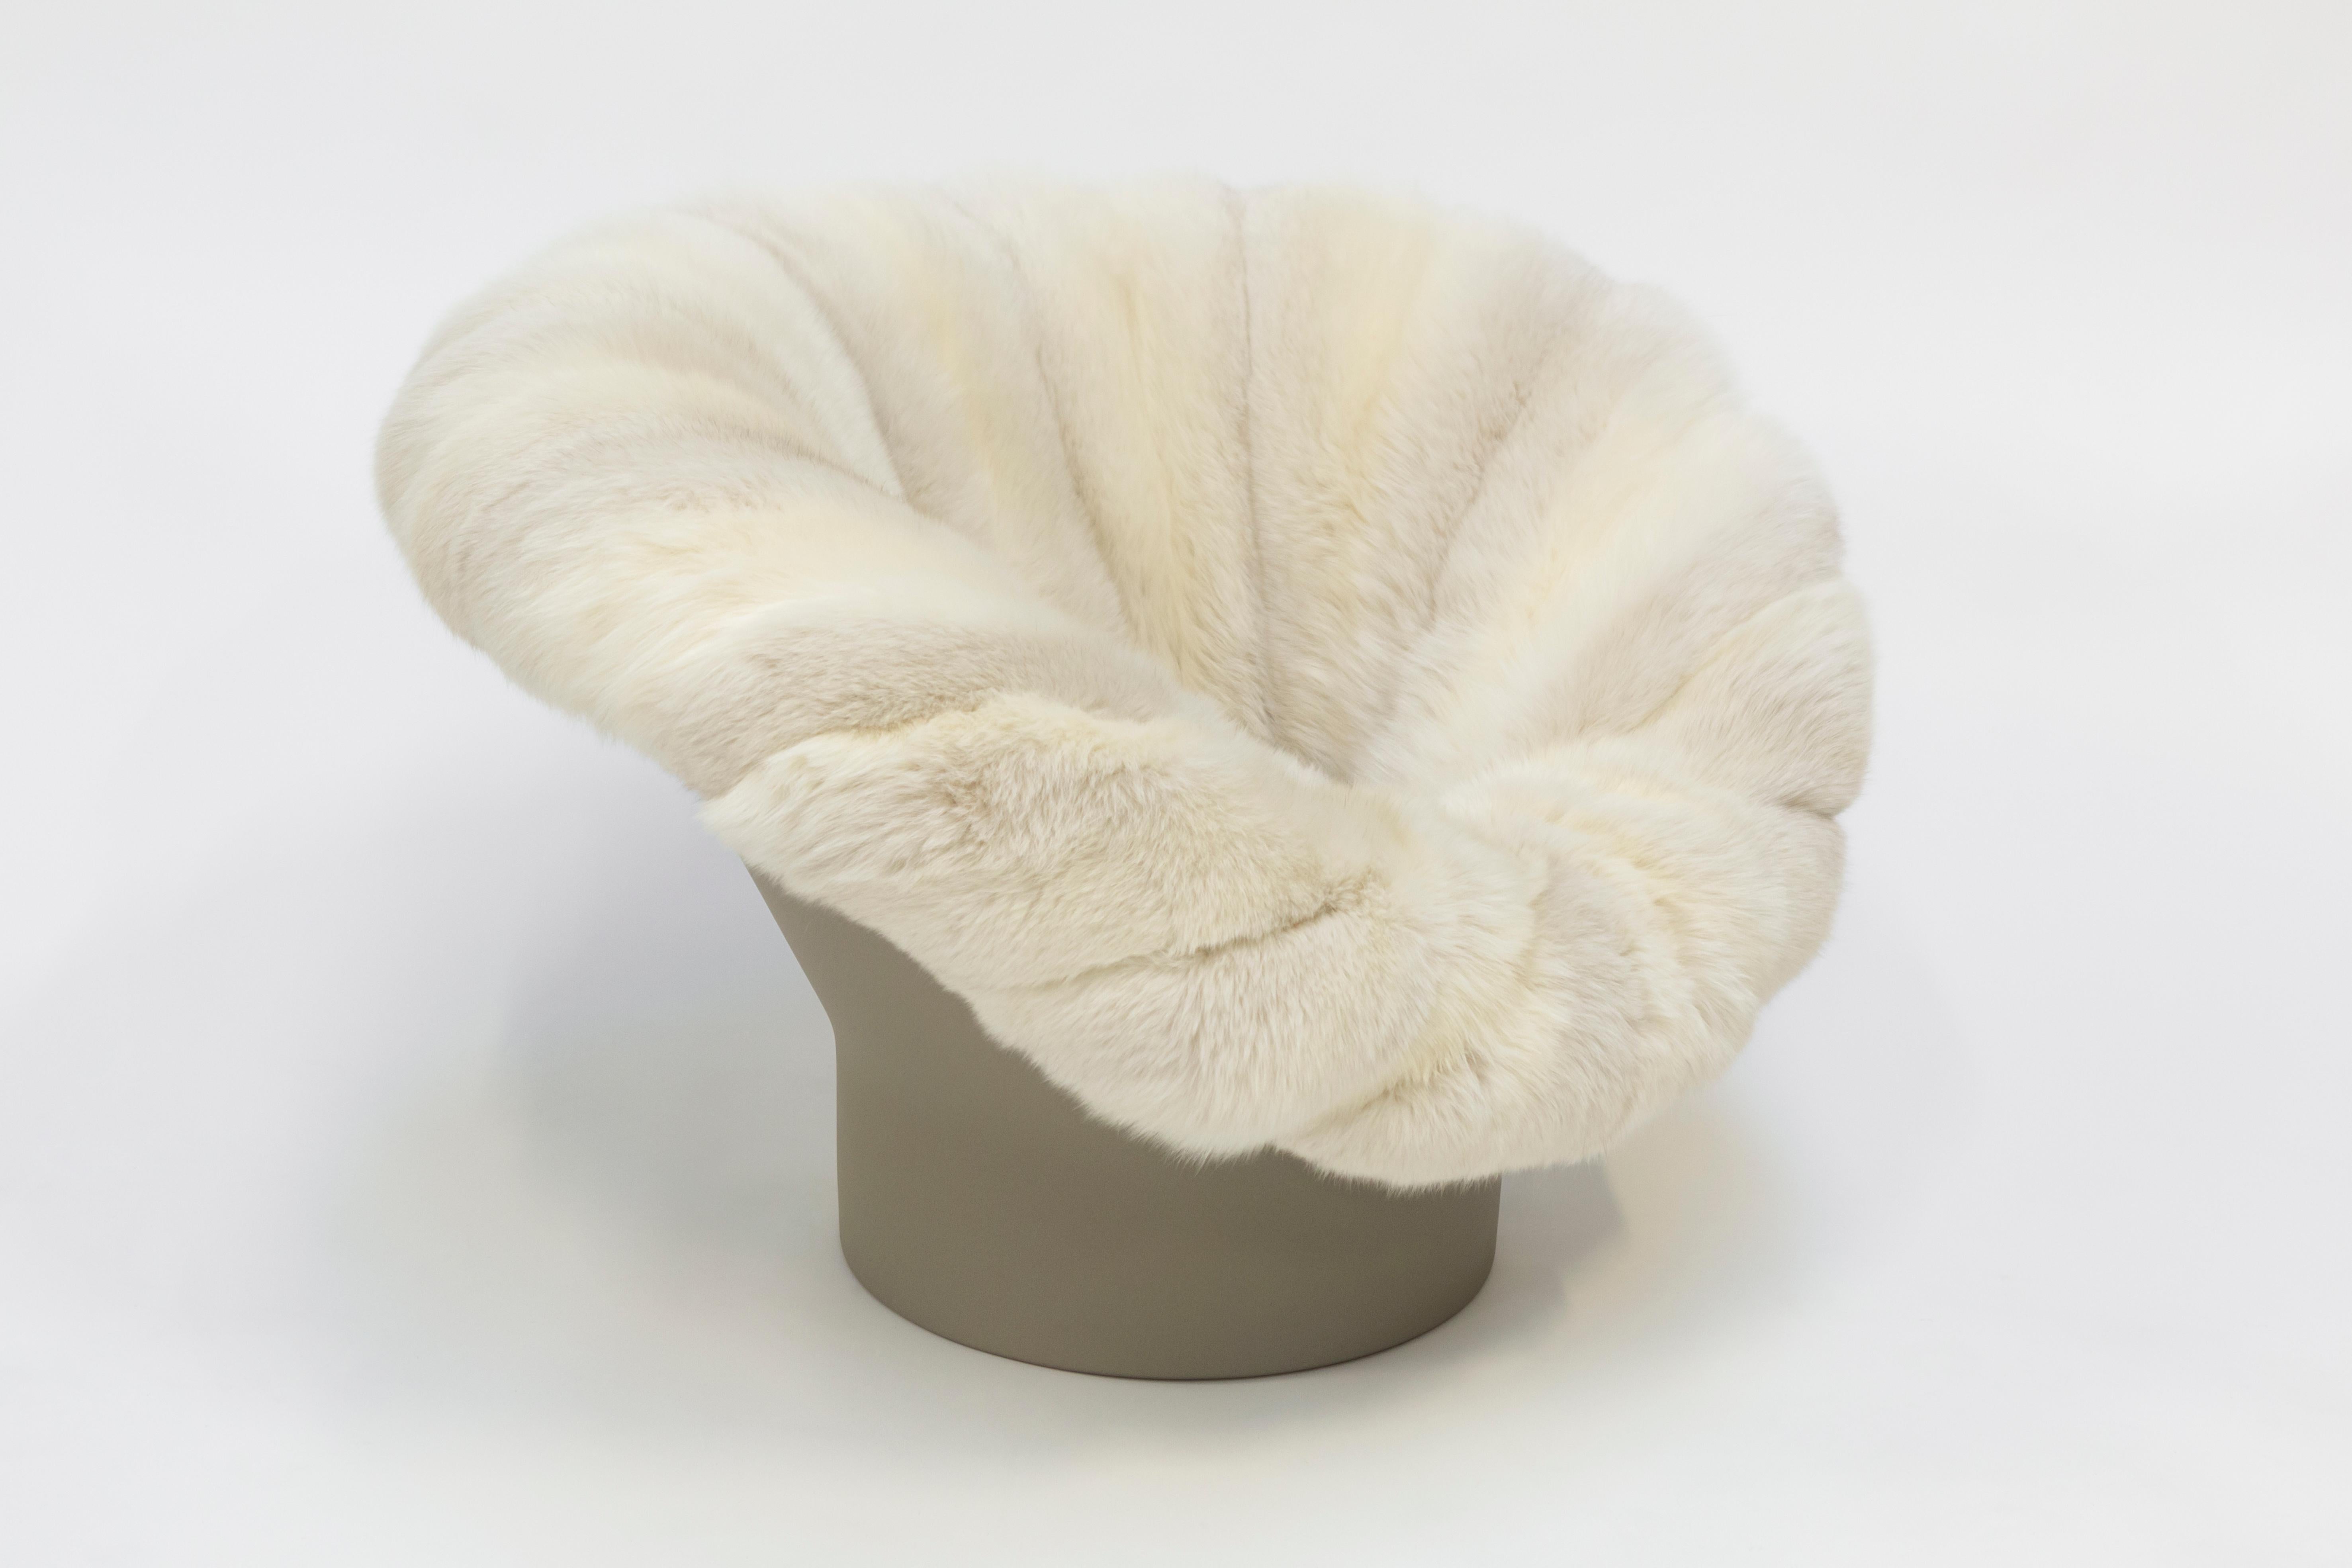 Dialoghi Mimetici collection by Draga&Aurel:

Upholstery in second-hand fox fur.  Fiberglass Structure - matt painted  (velvet effect) .

Color white, size cm: L 90, W 100, H 70.
Please note that our prices exclude VAT. VAT may need to be added to